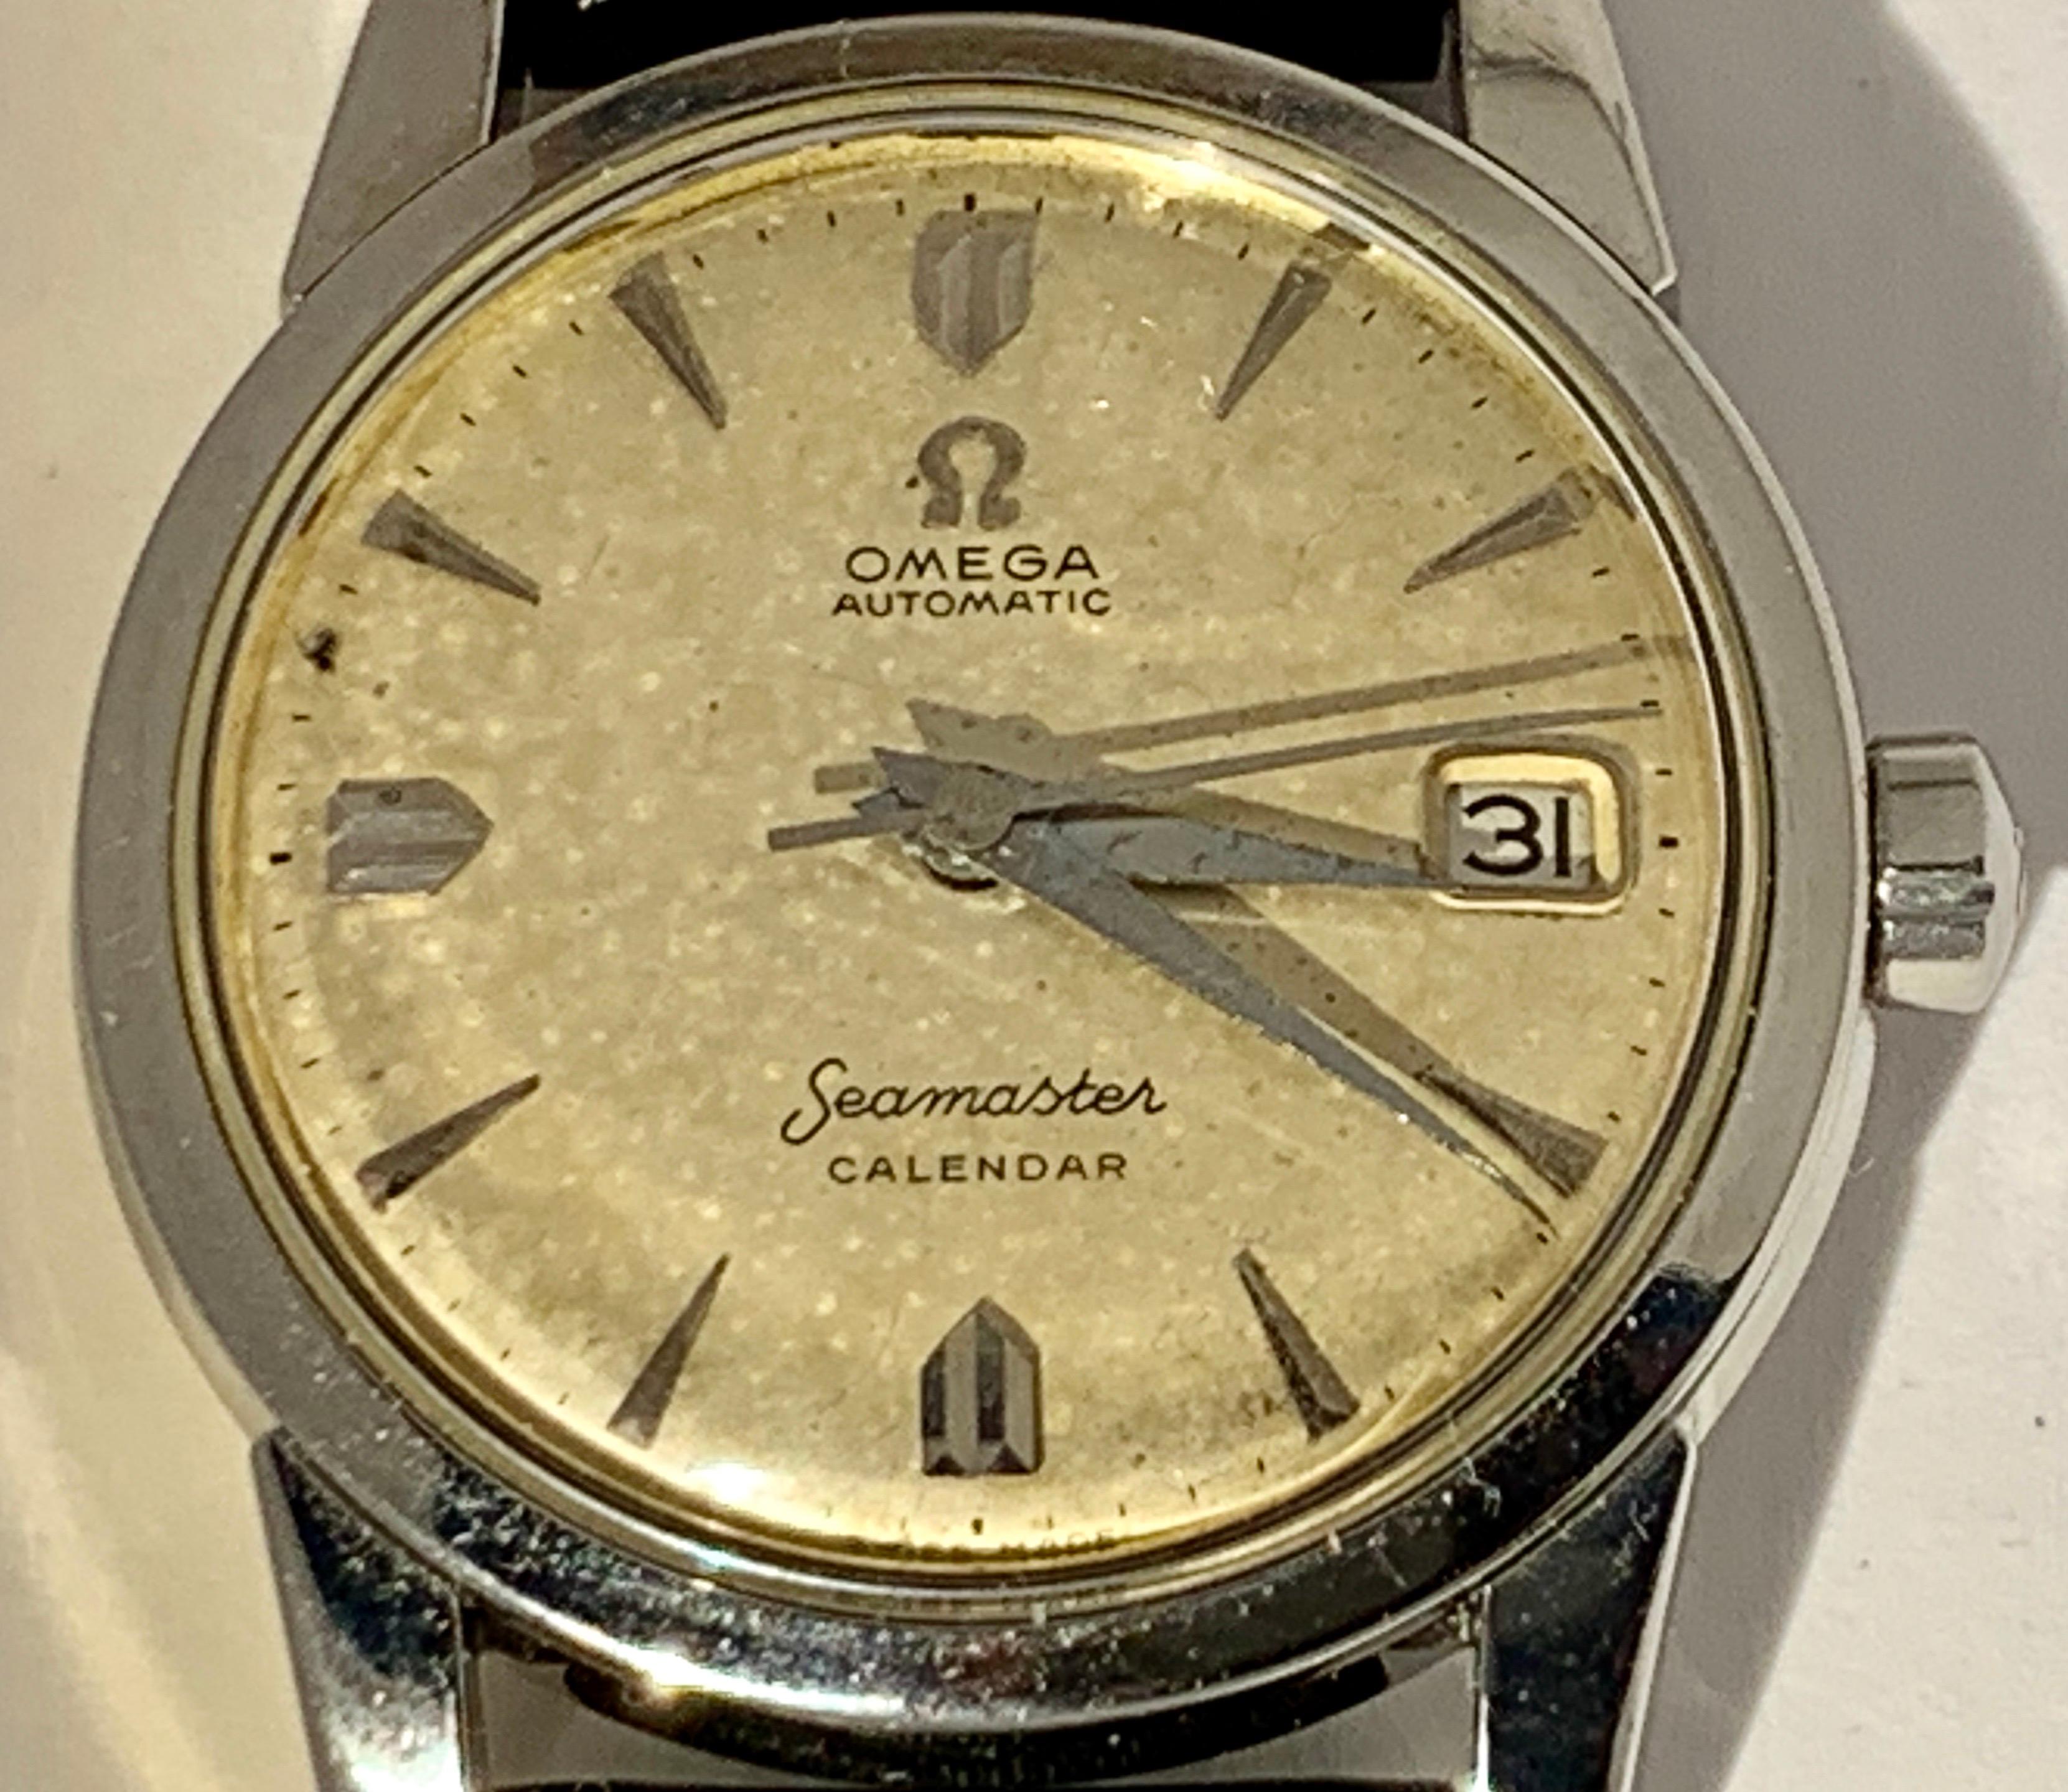 The Original dial is in fair, unrestored condition.Unpolished stainless steel case with snap back.Movement Cal.503 automatic in fully working order, keeps correct time.Cleaned and serviced recently.Brand new leather strap included.: 34mm without the